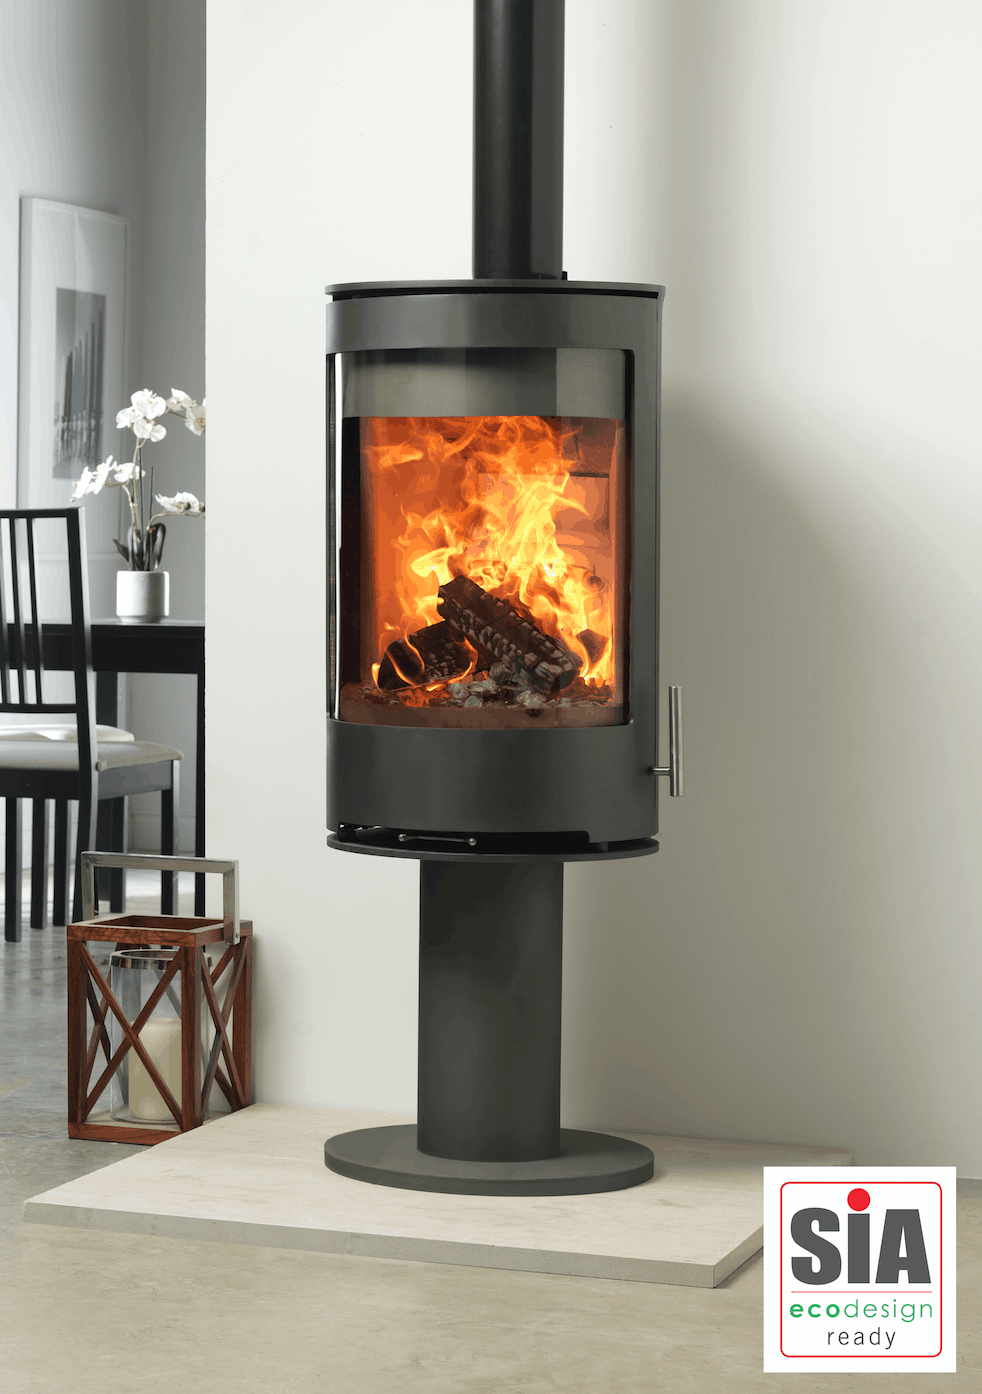 Consumers “Not Being Informed About Wood Burning Stoves”